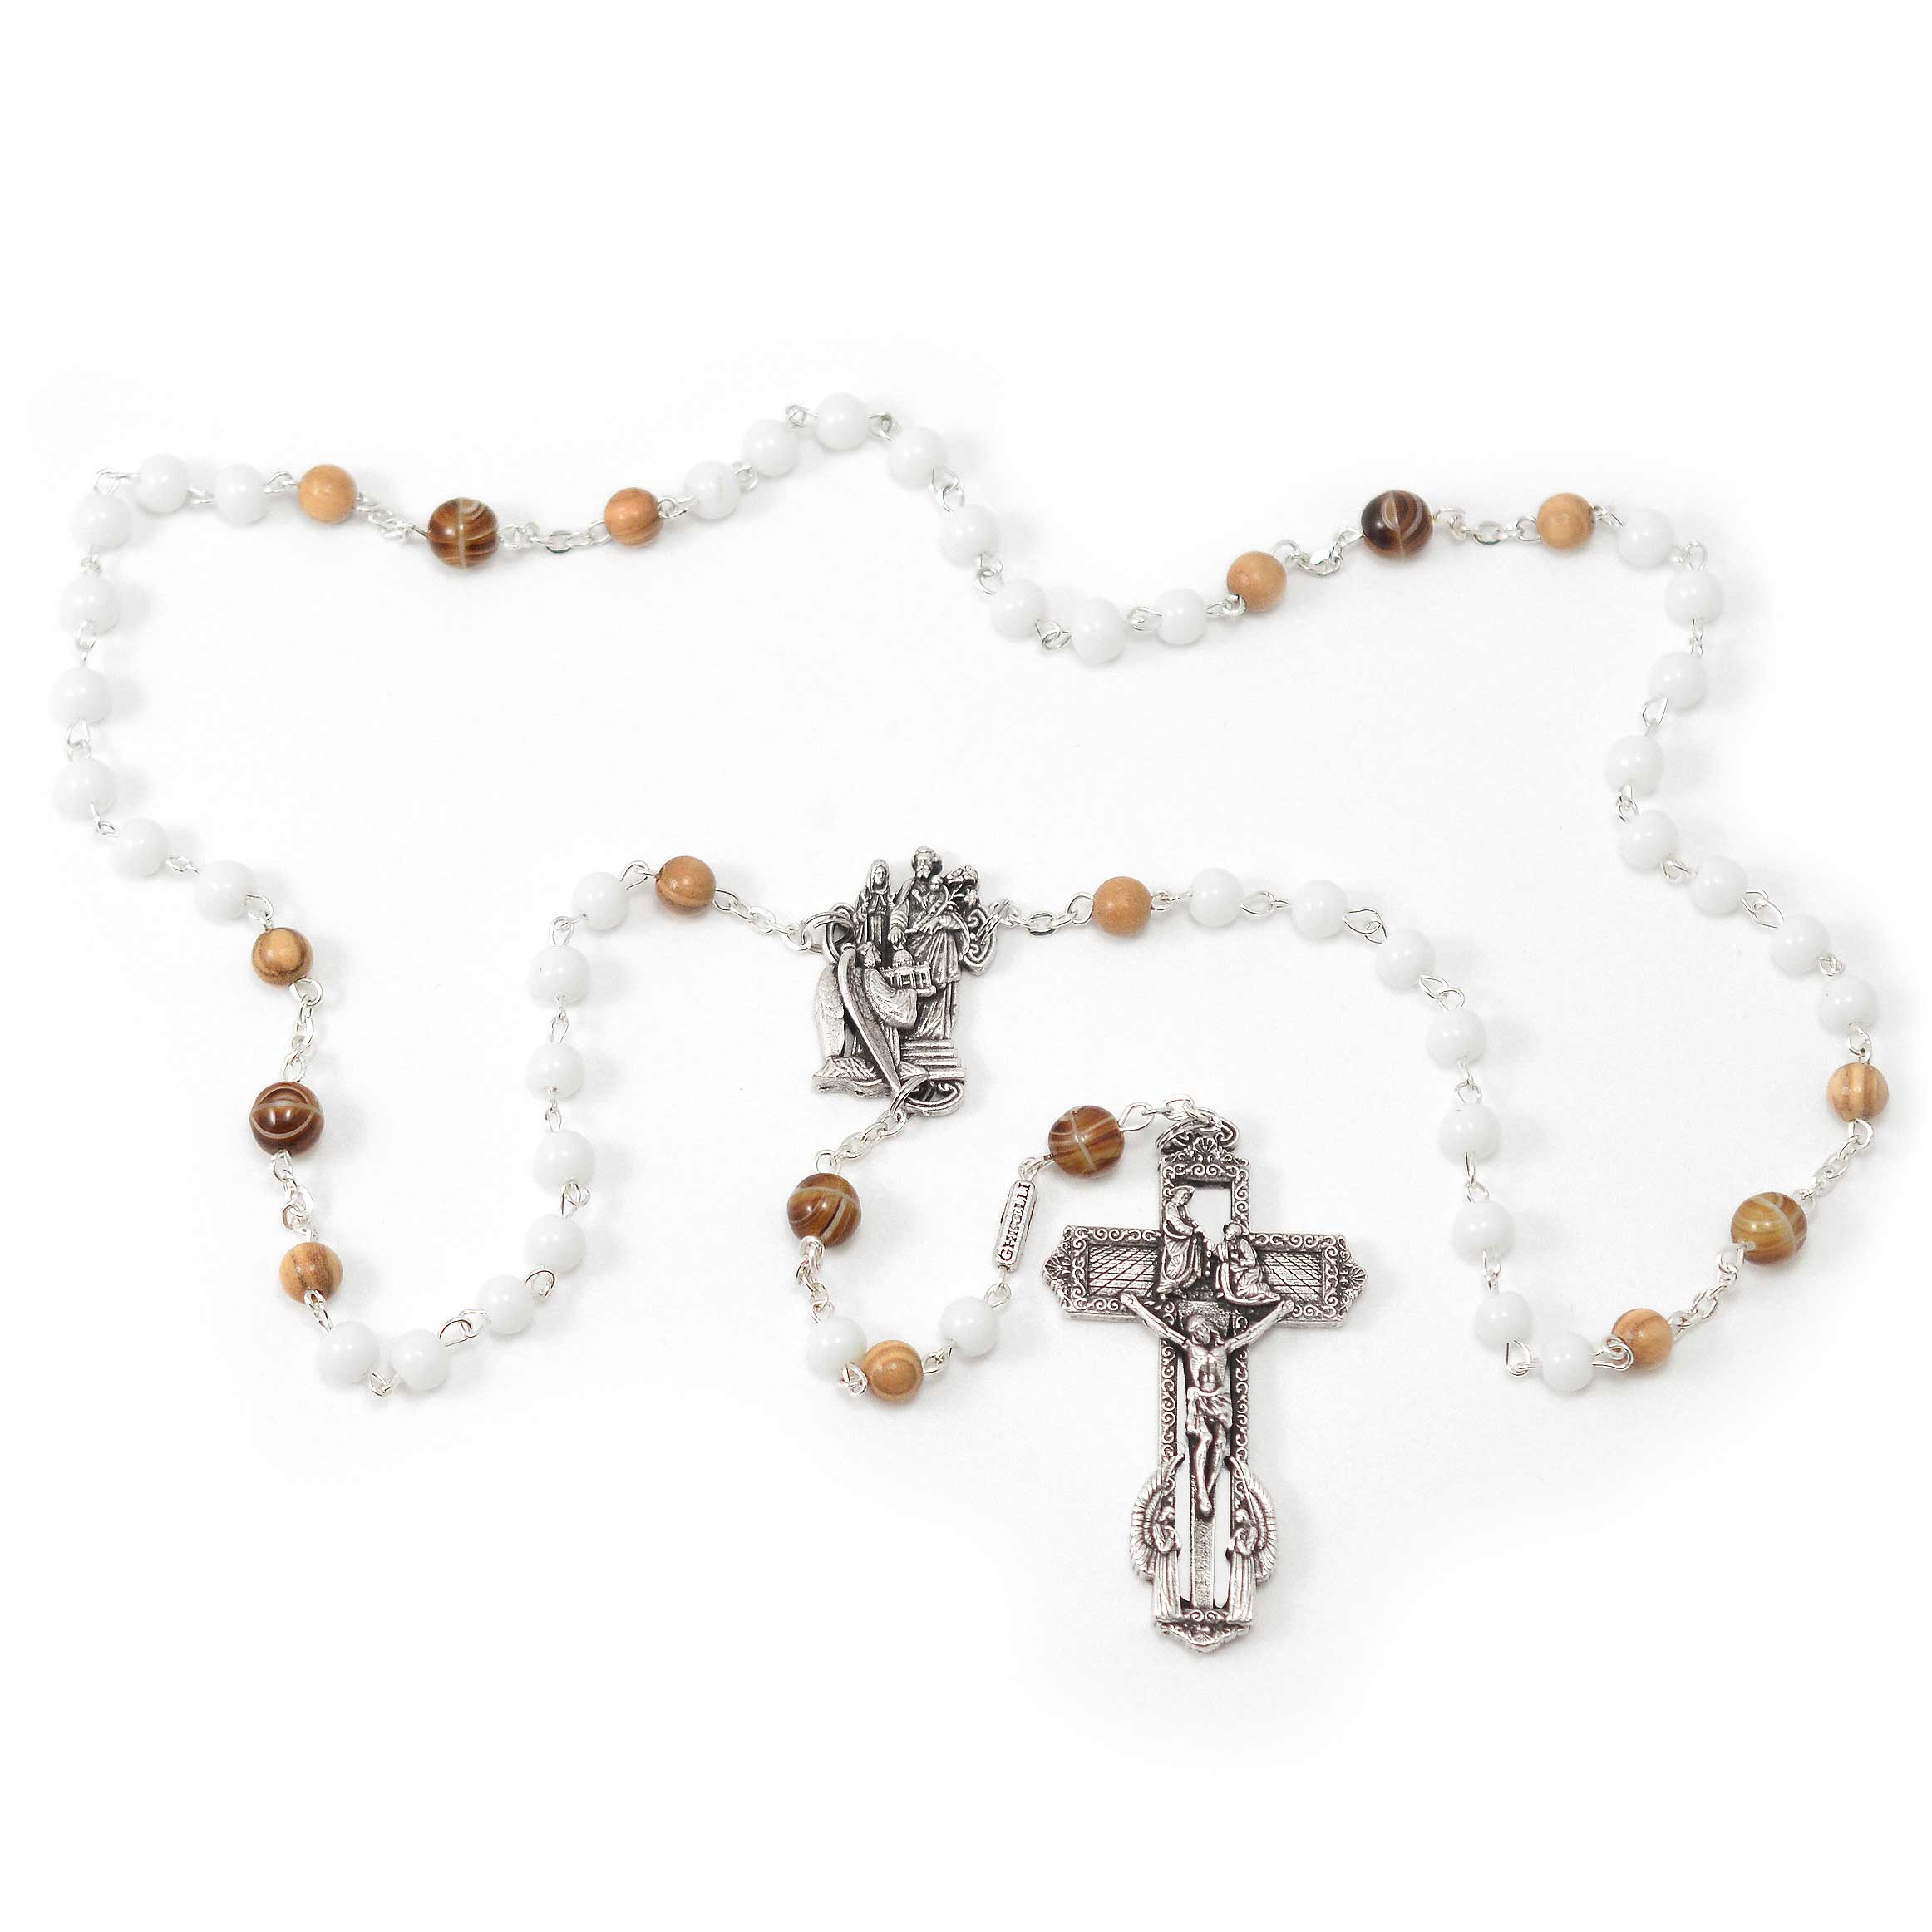 Joseph Rosary in Antique Silver Plated Finish by Ghirelli 14995 St 